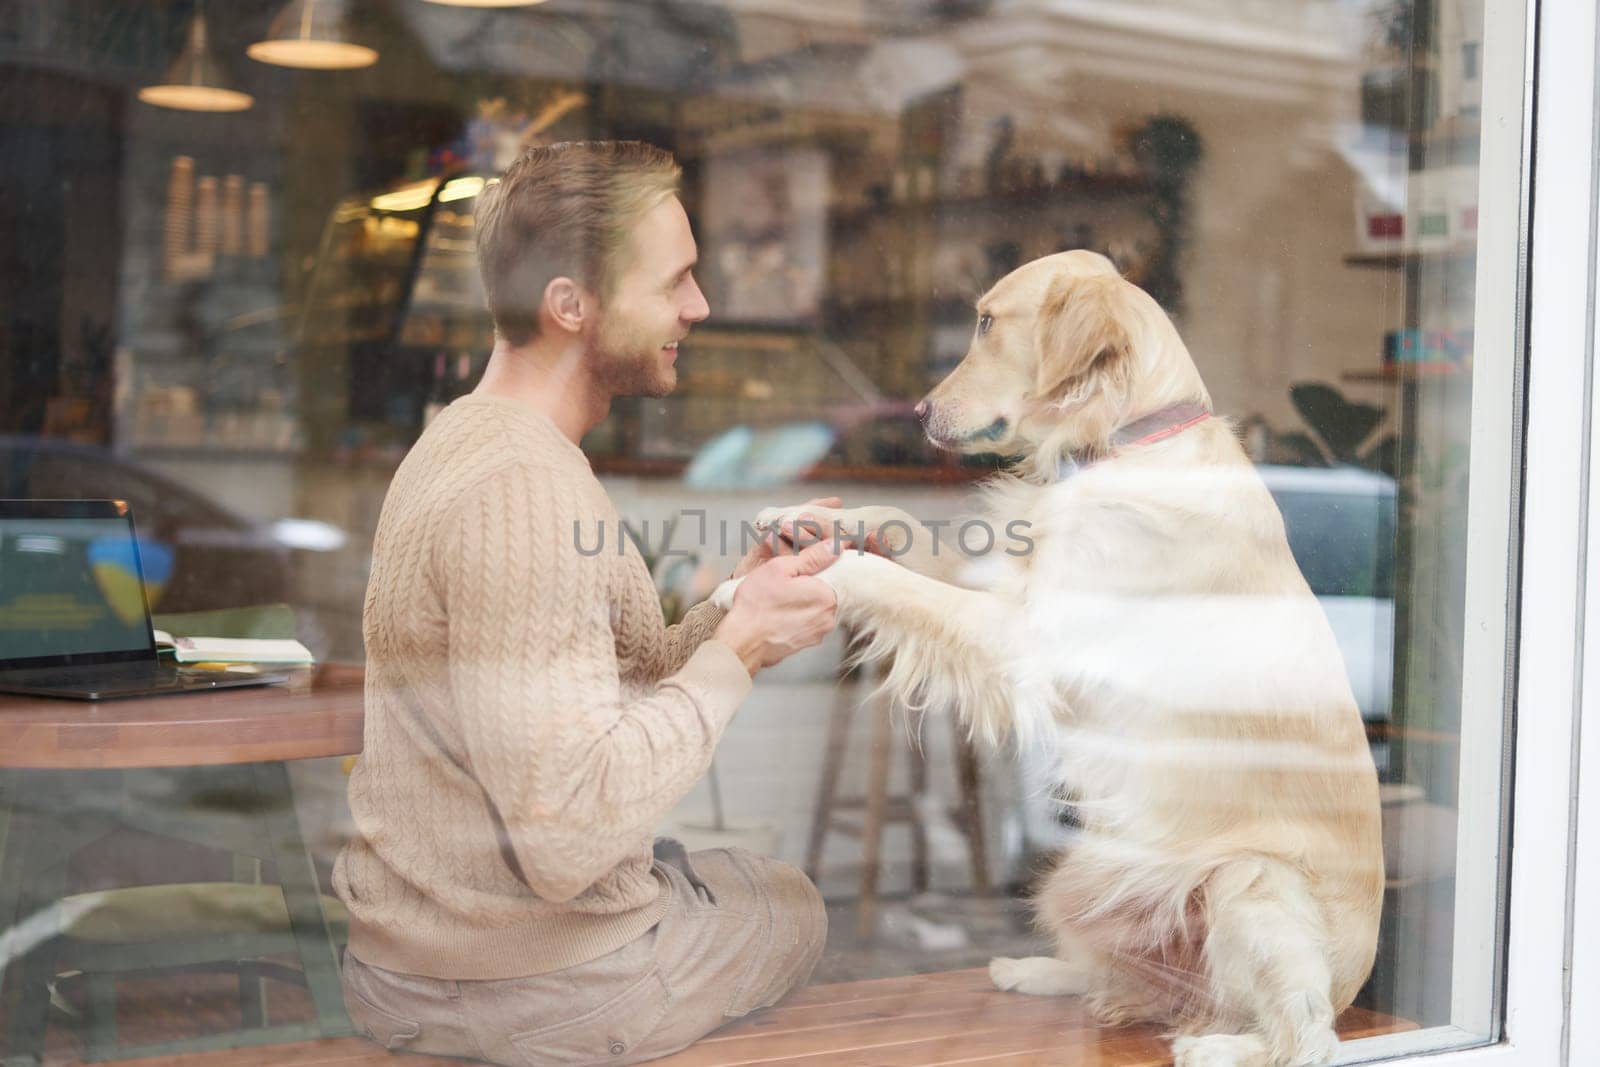 Pet friendly restaurants or public places, support dog, pets as companions. Outdoor shot of cafe window where a visit with golden retriever enjoying quality time.